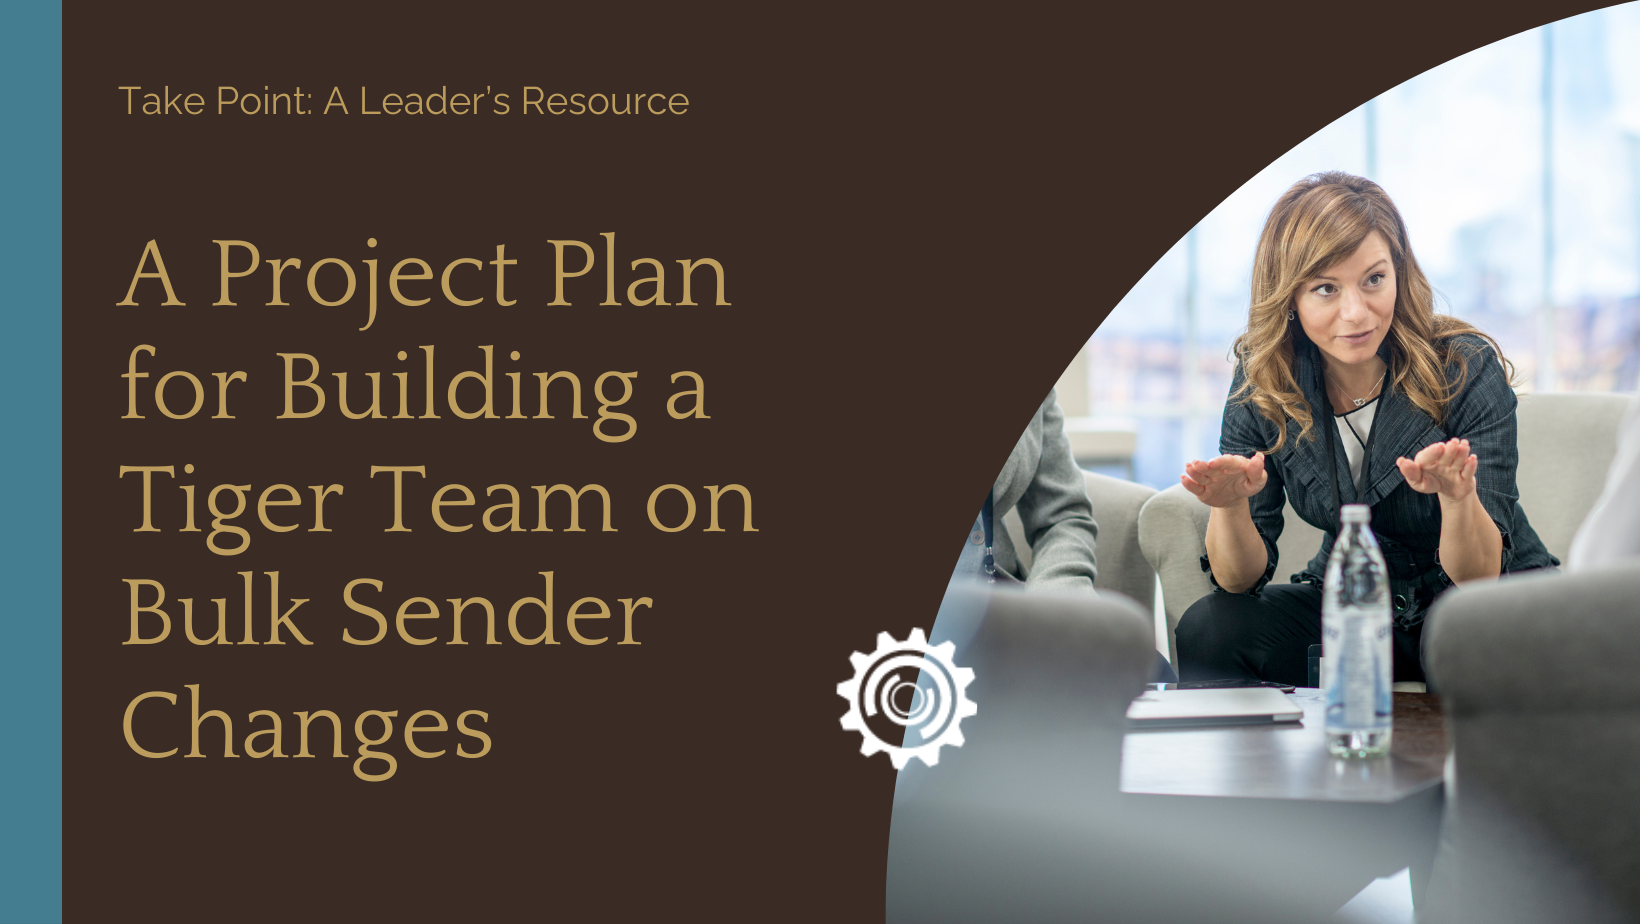 Image of marketing leader with text: A Project Plan for Building a Tiger Team on Bulk Sender Changes